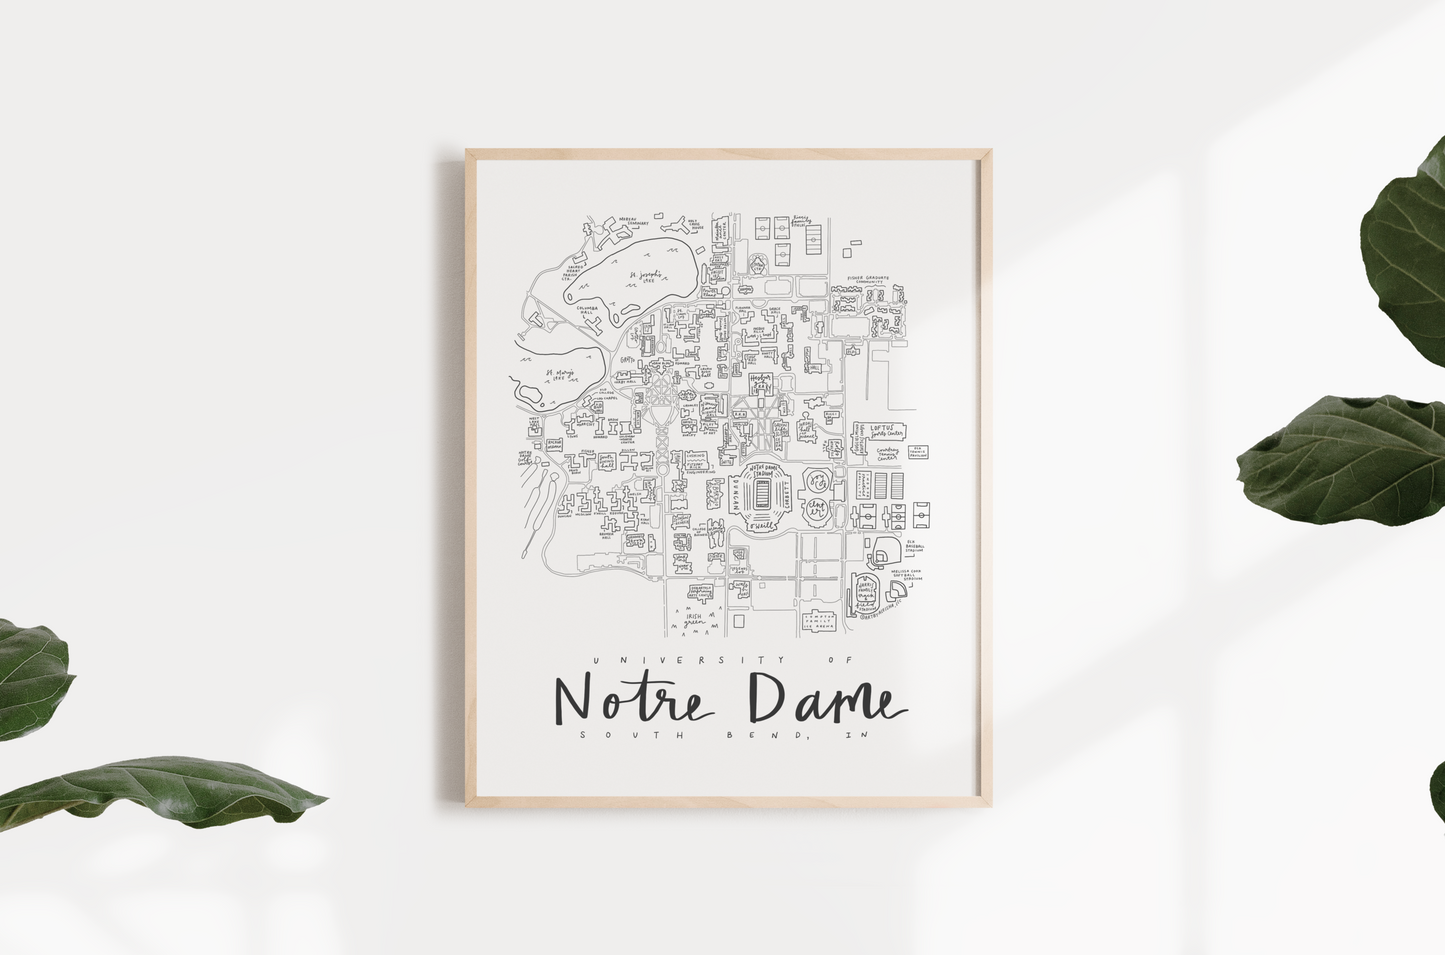 University of Notre Dame Campus Map Print